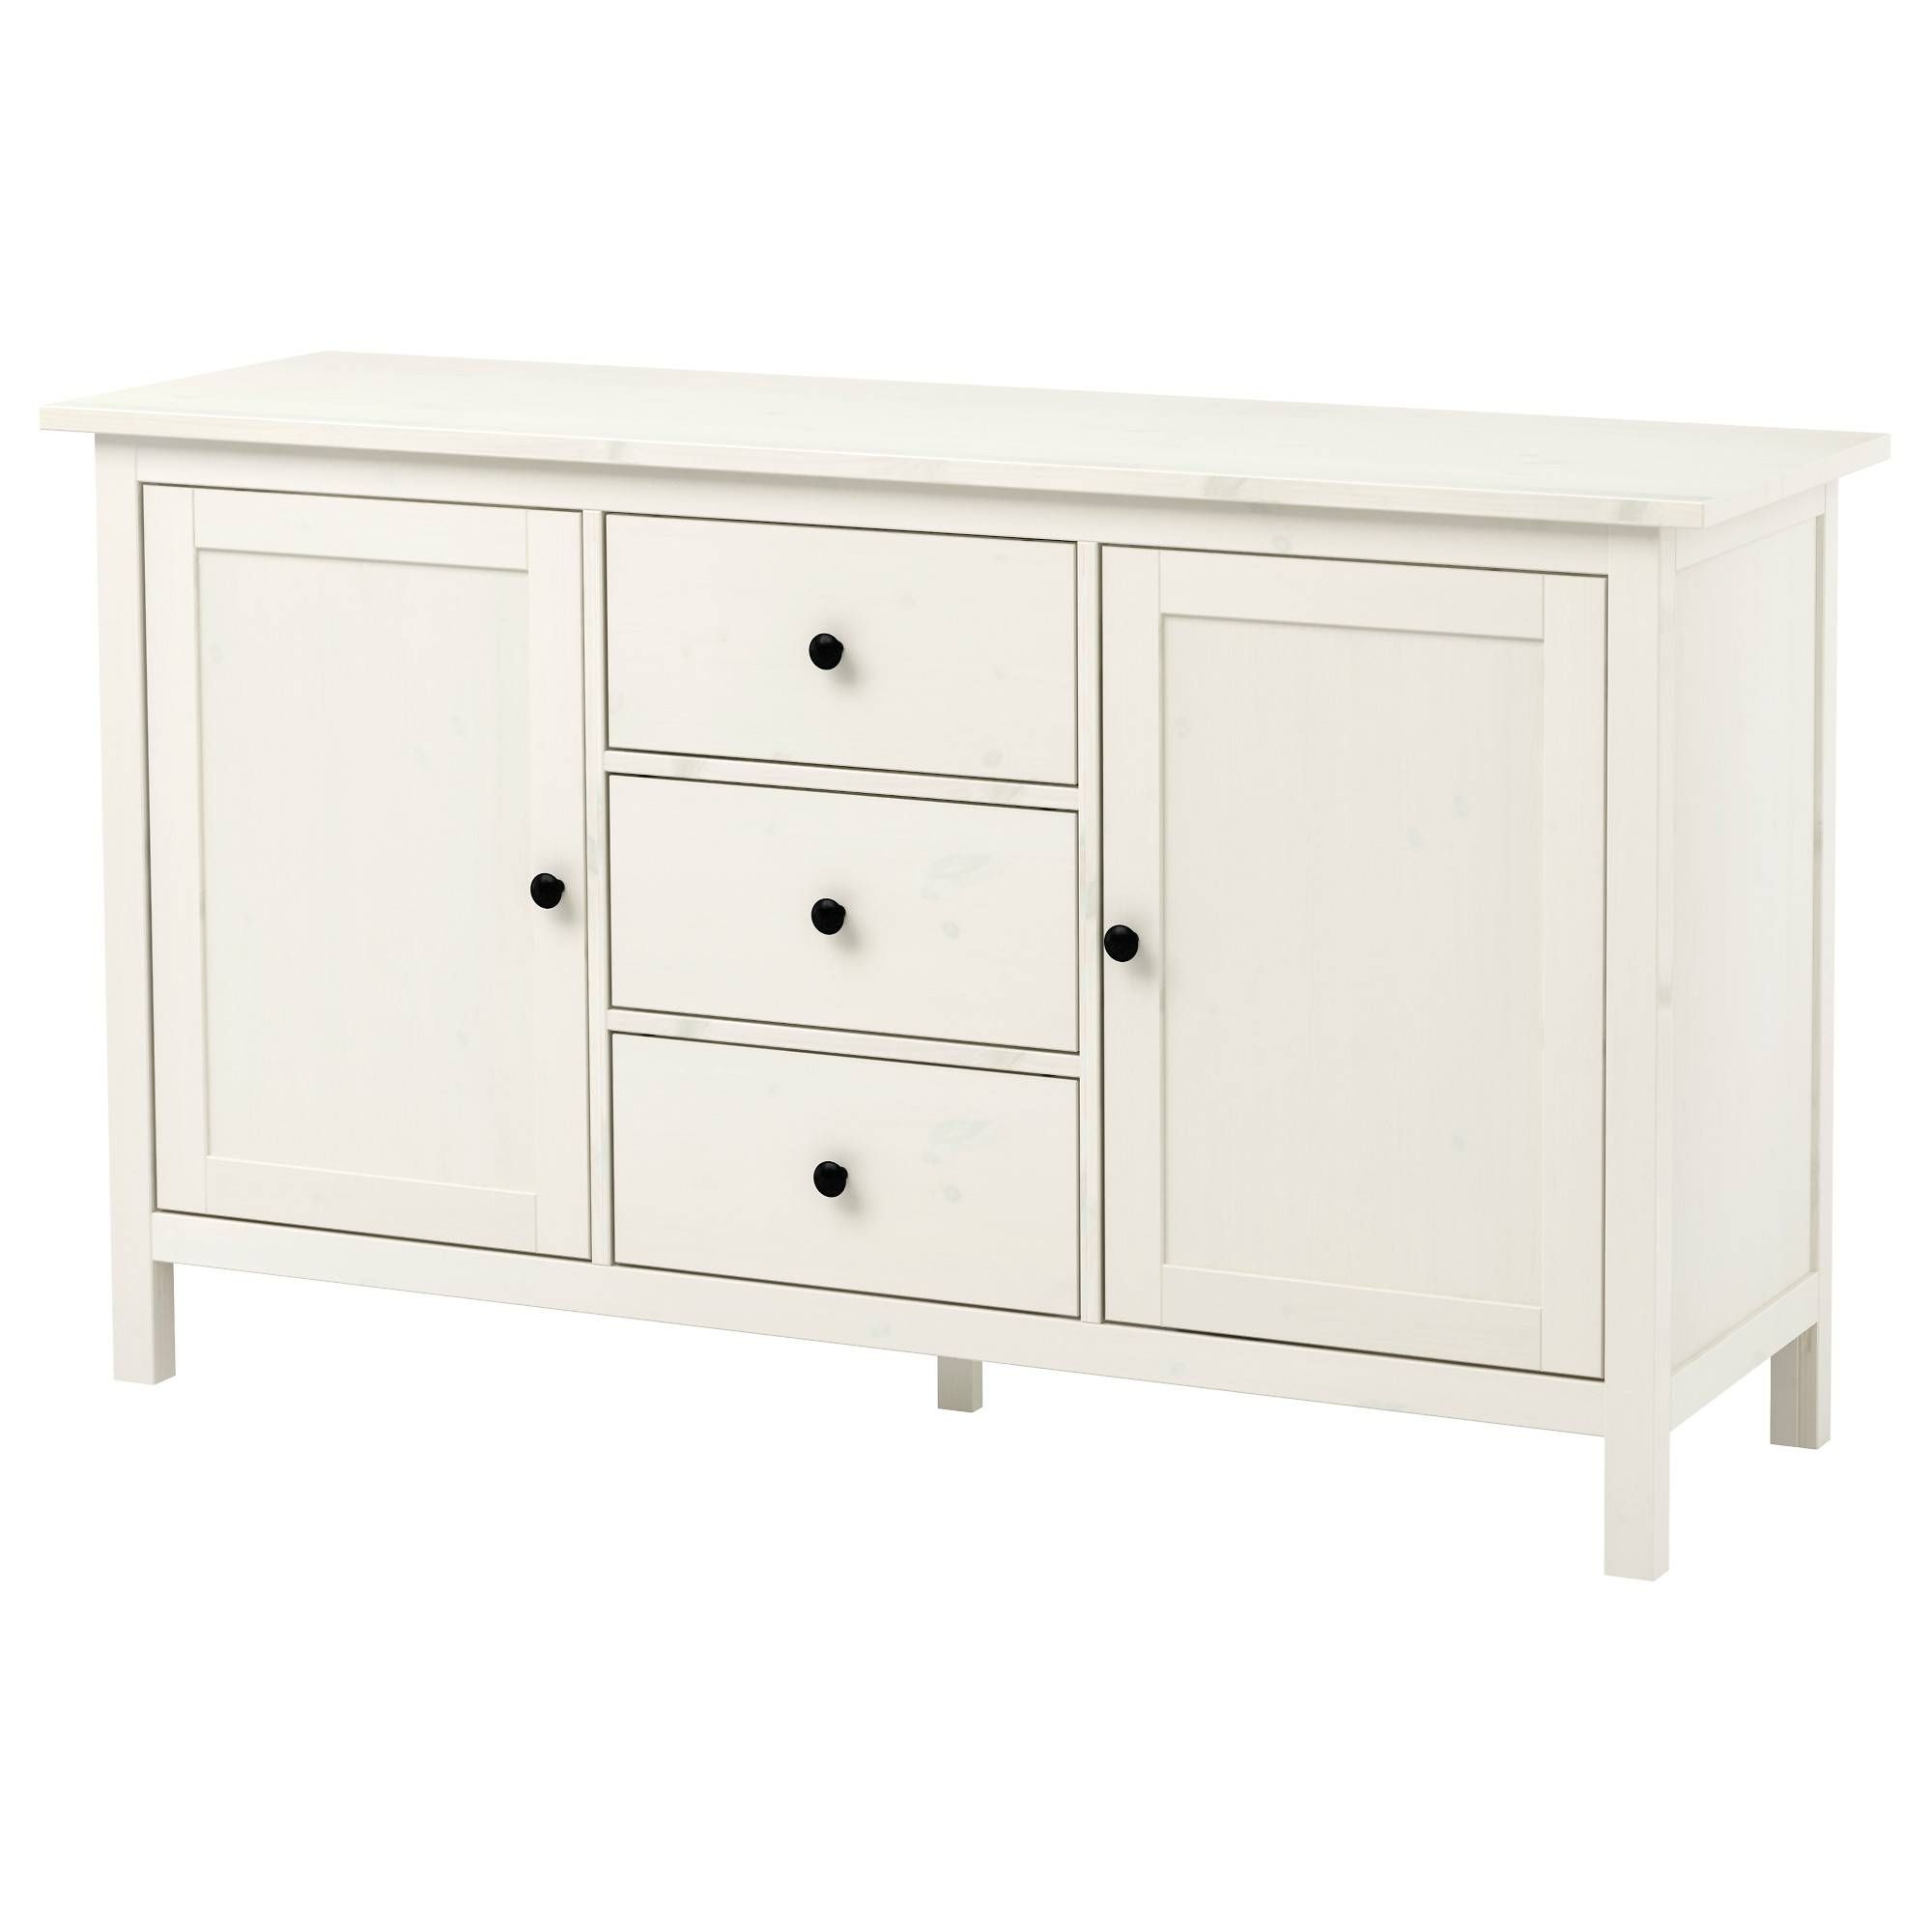 Buffet Tables & Sideboards – Ikea With White Sideboards Furniture (View 10 of 20)